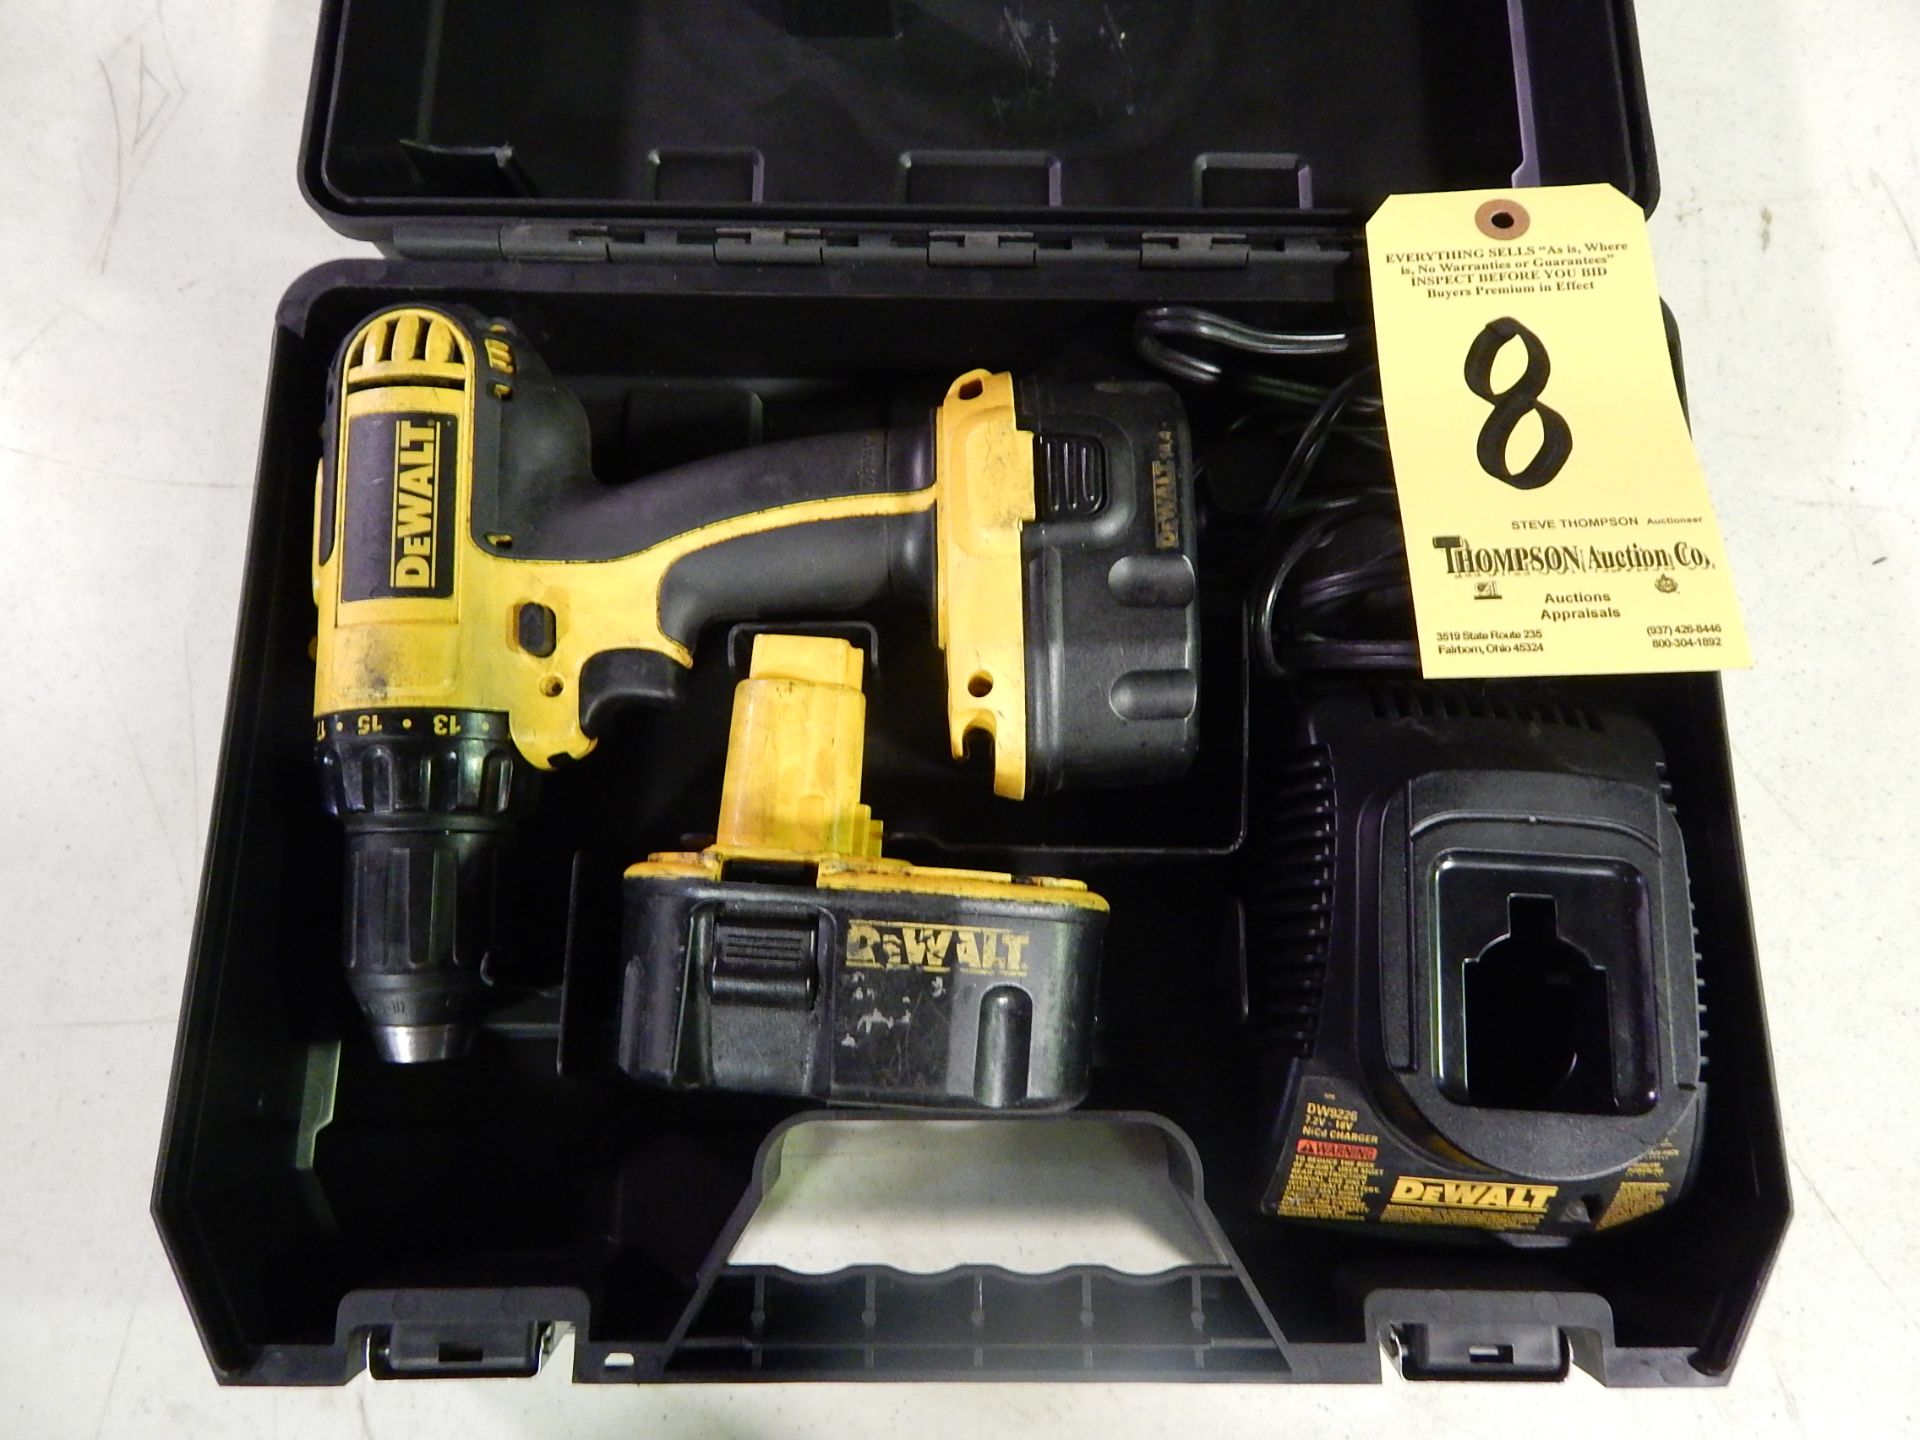 Dewalt 14.4 Volt Cordless Drill with Charger and Case